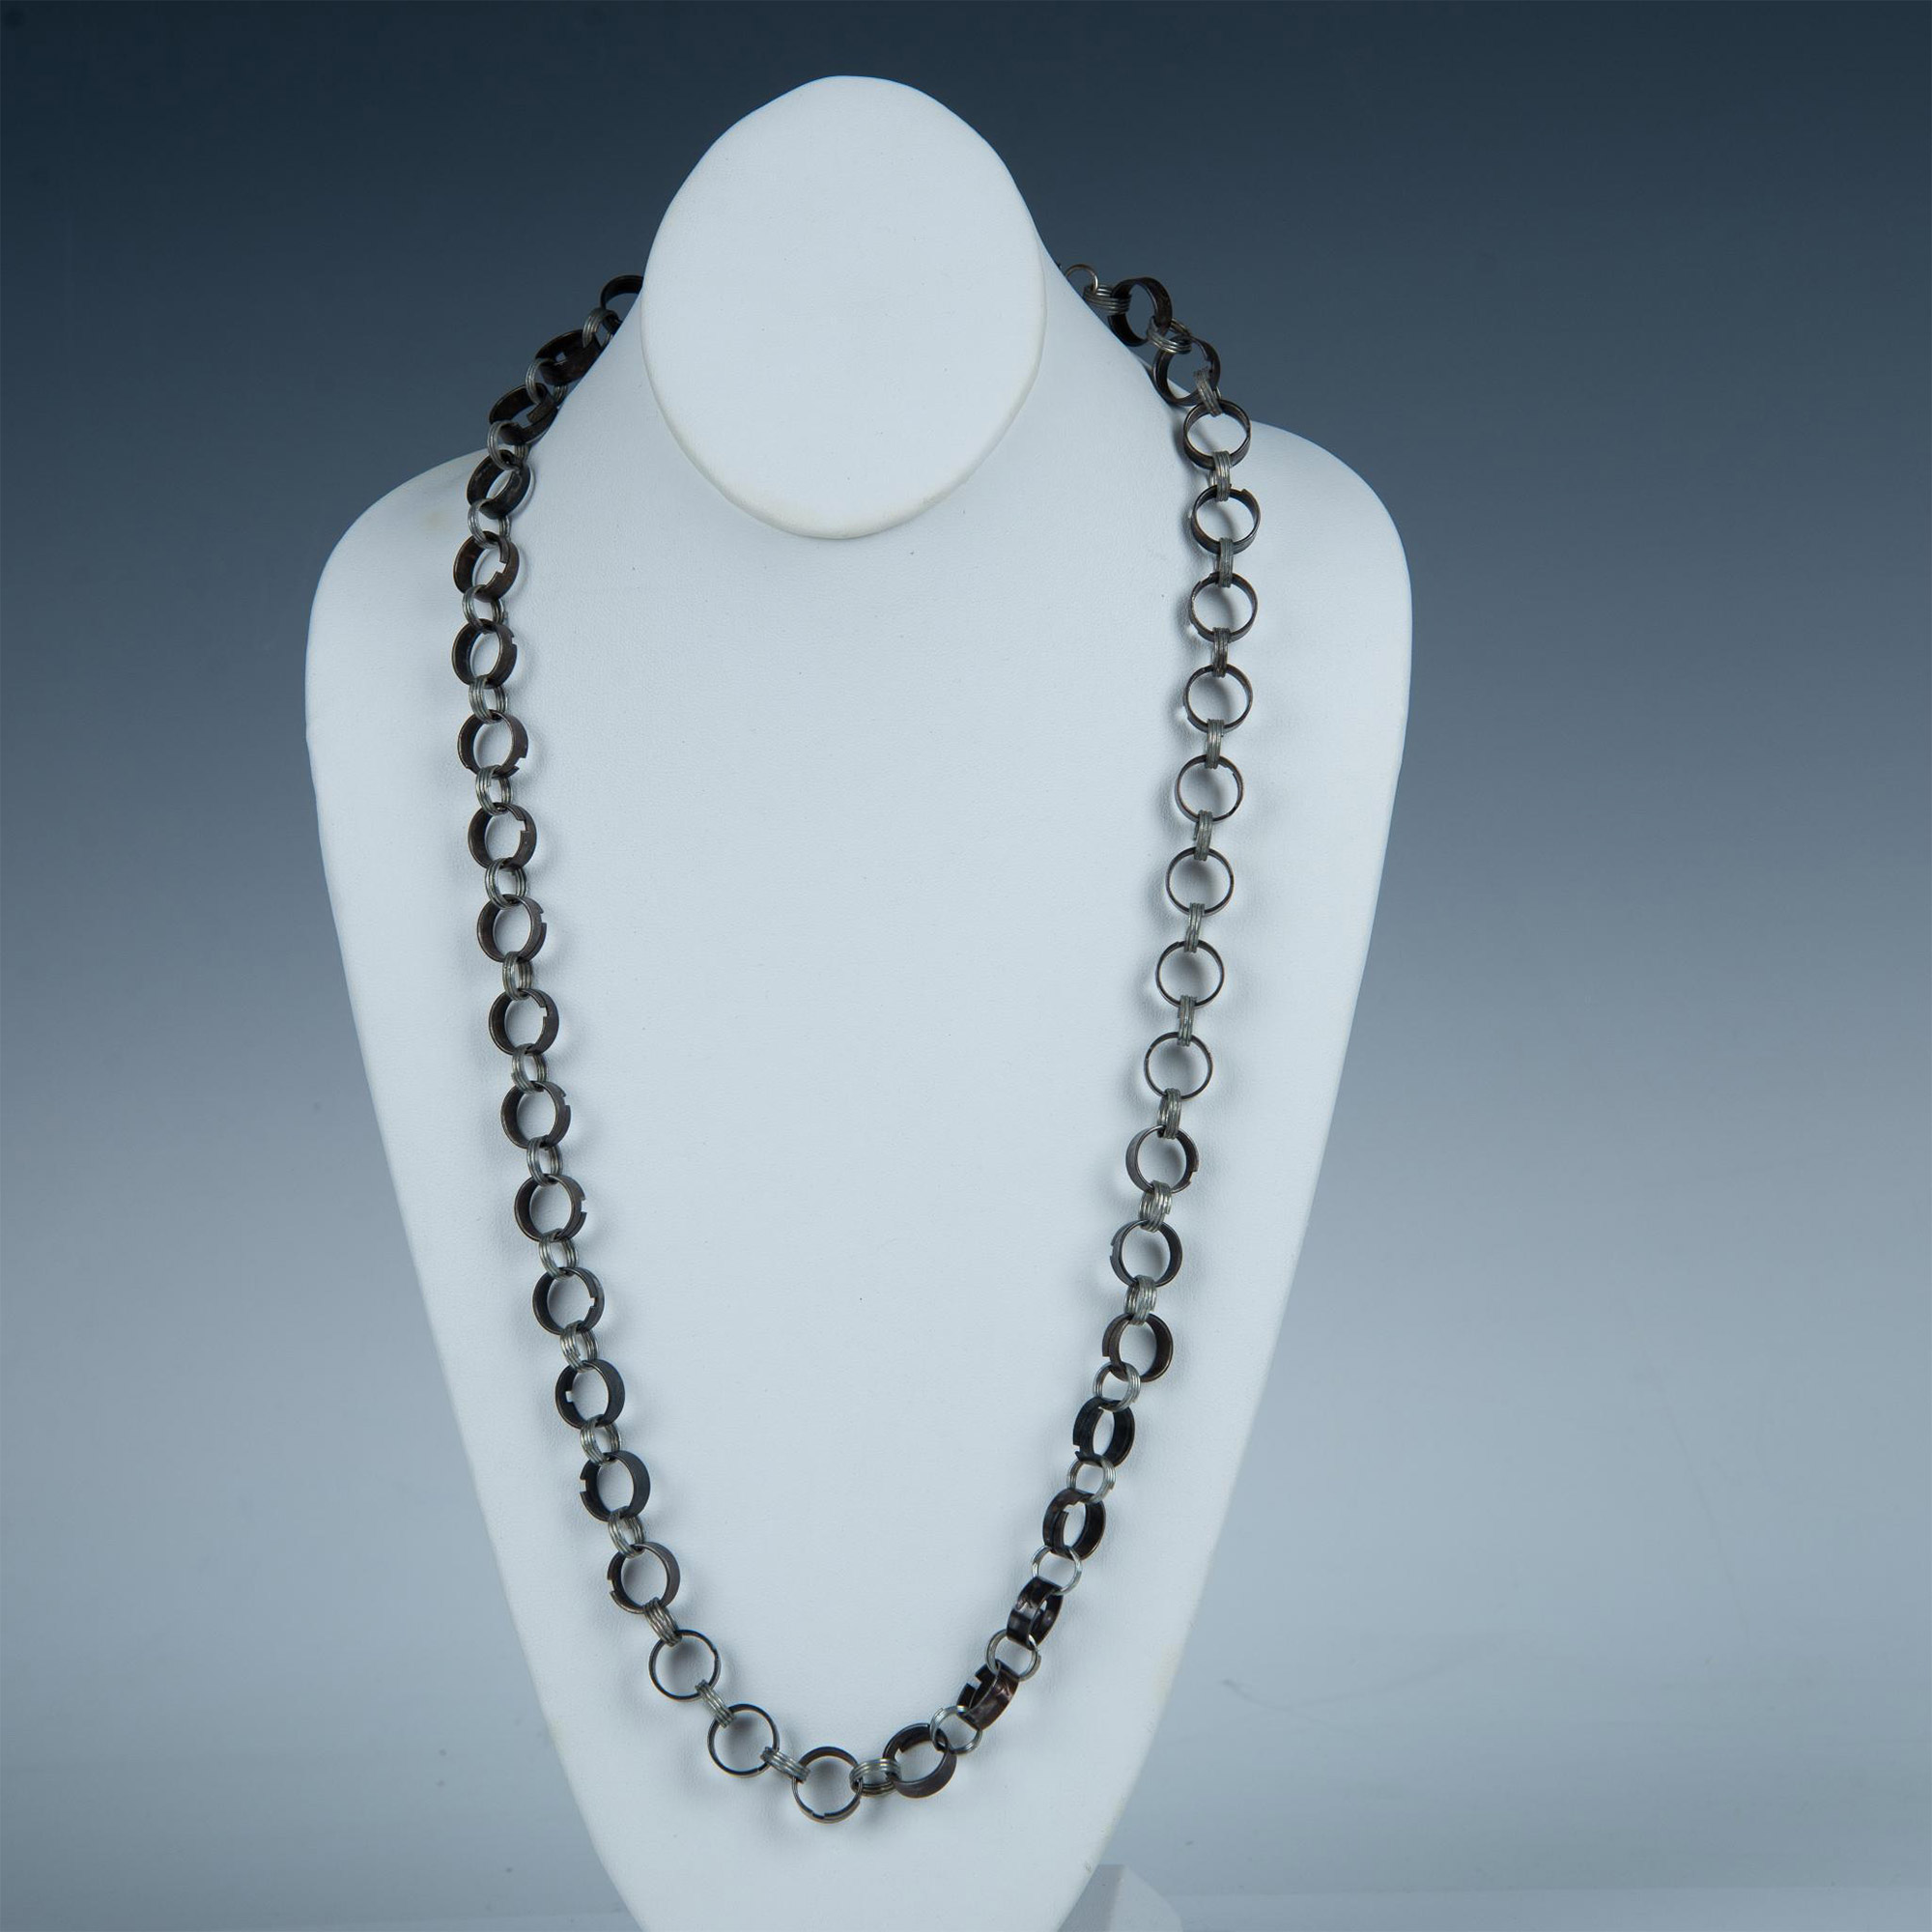 Industrial Chainmail Inspired Silver Metal Ring Necklace